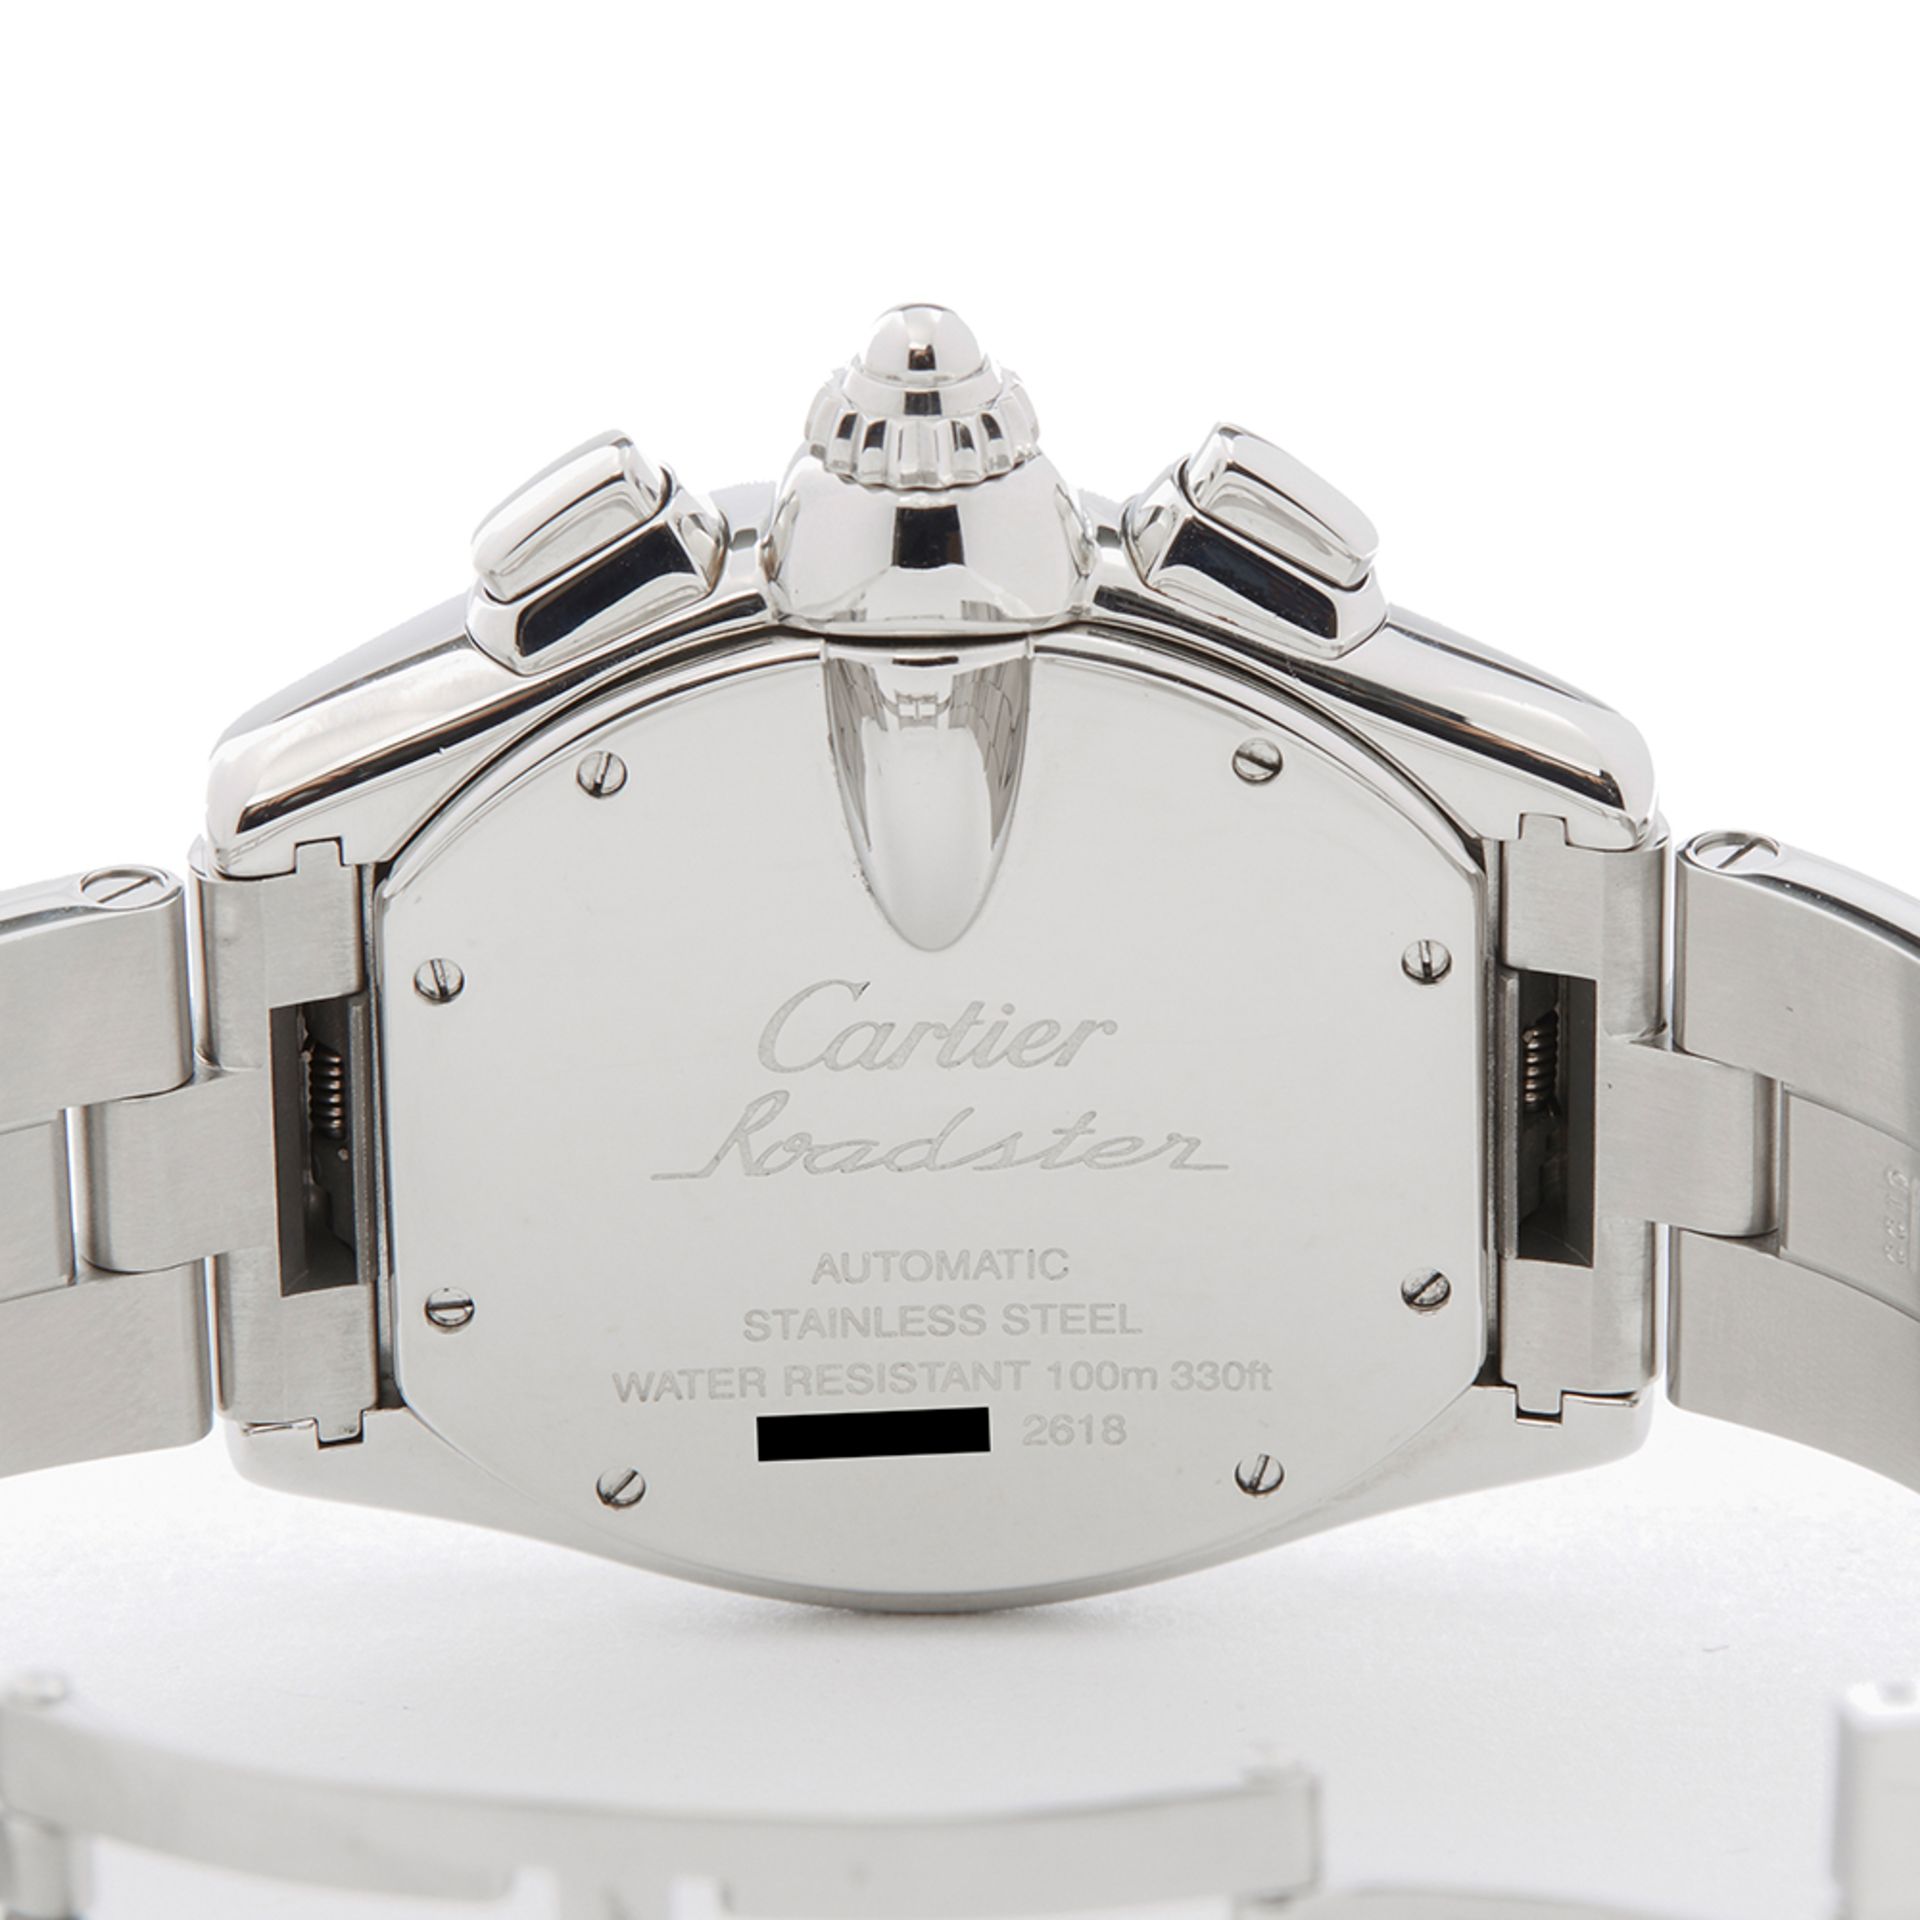 Cartier Roadster XL Chrongraph Stainless Steel - 2618 or W62019X6 - Image 7 of 7